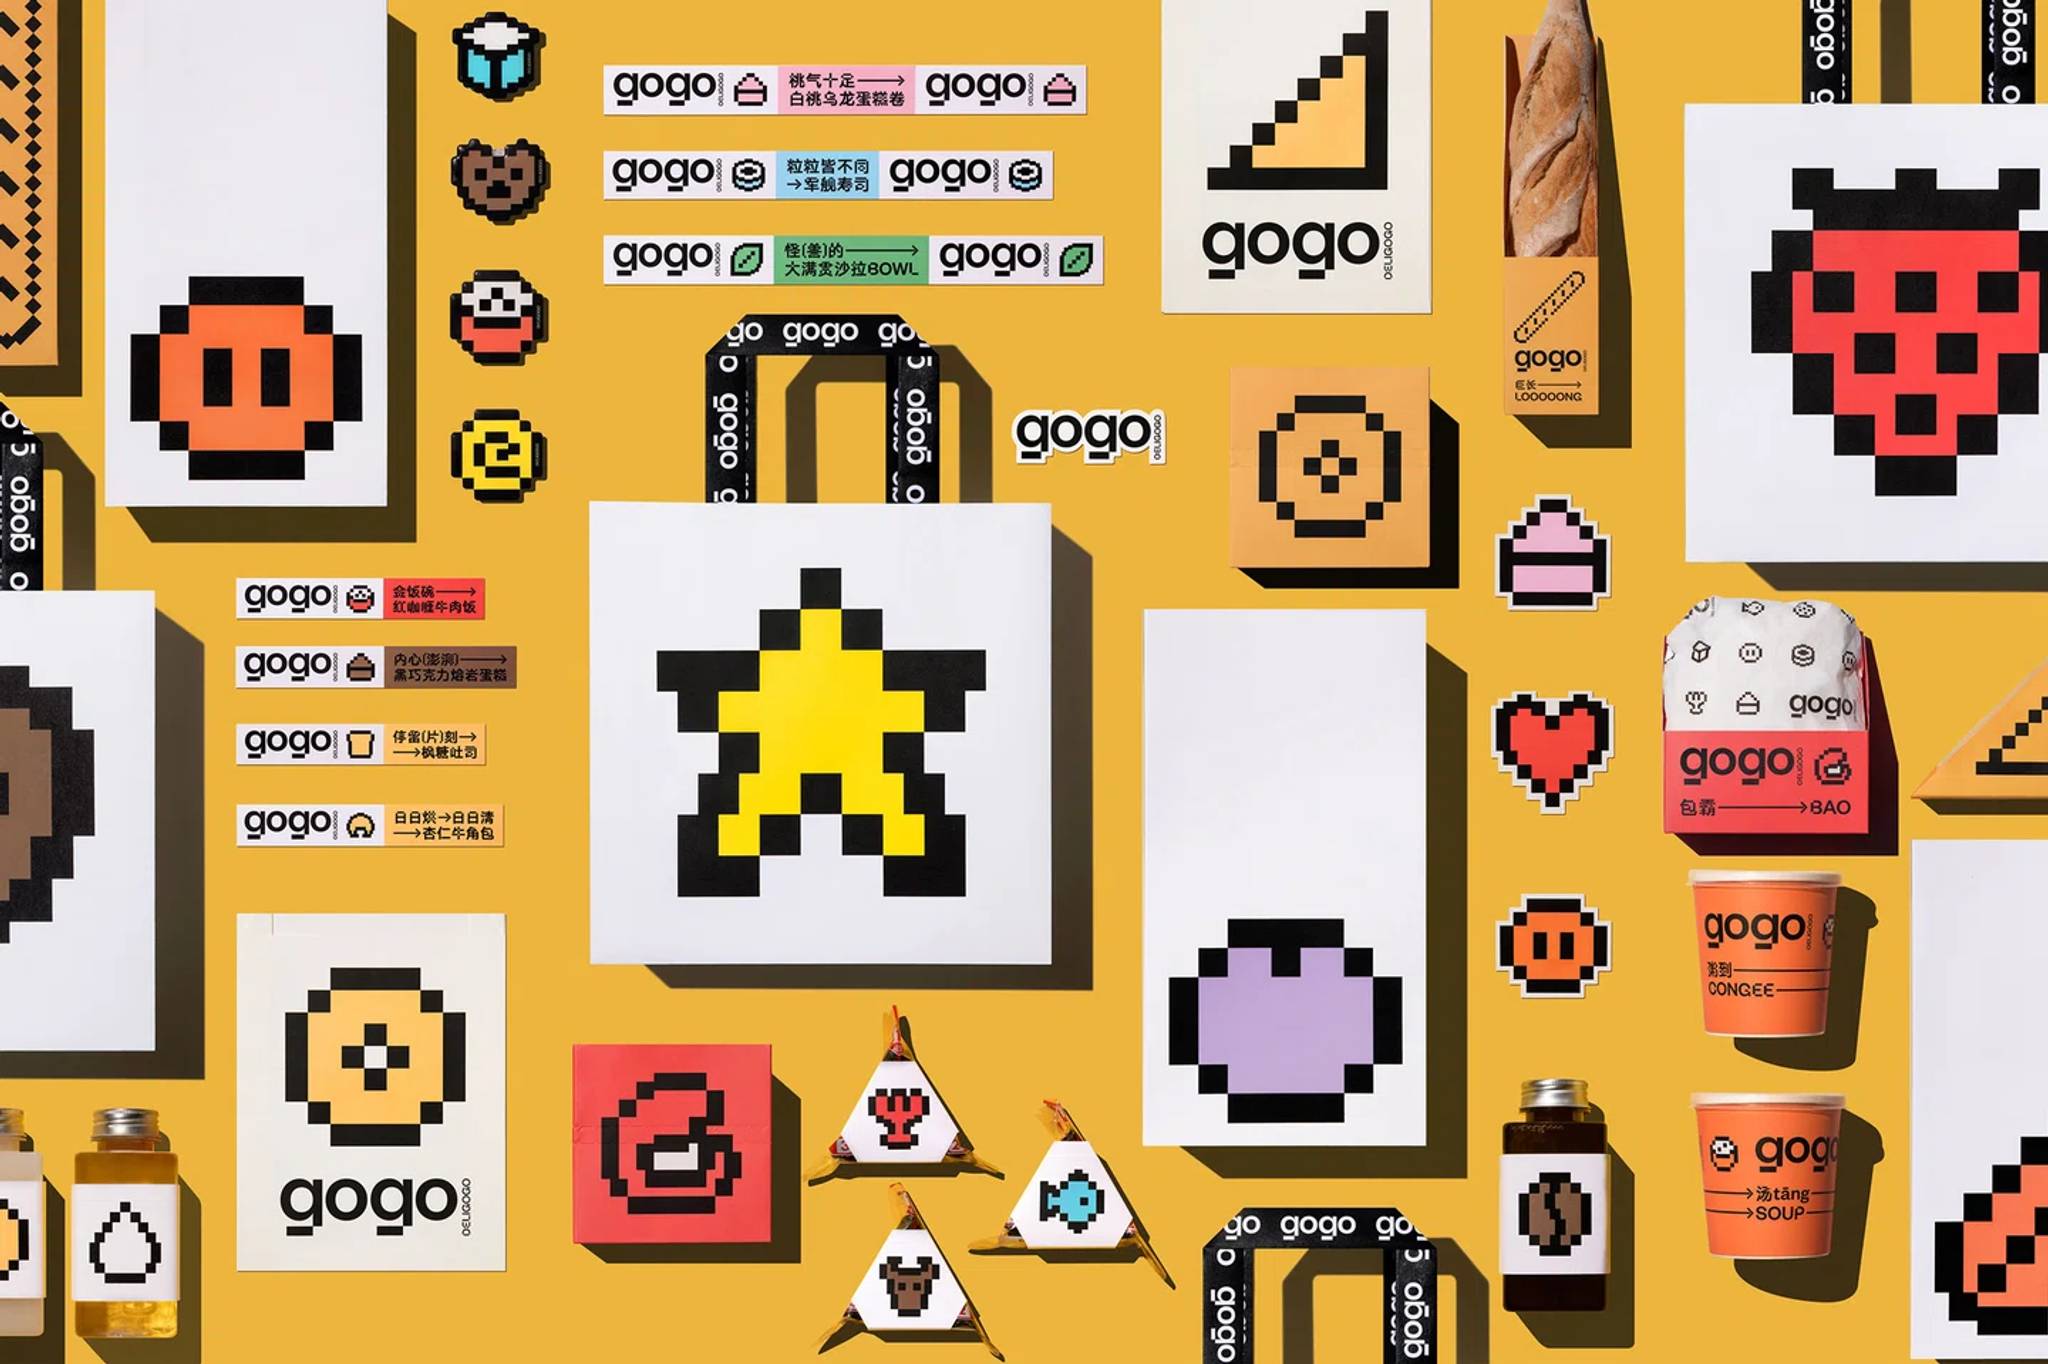 Gogo's 8-bit graphics elevate everyday commute moments